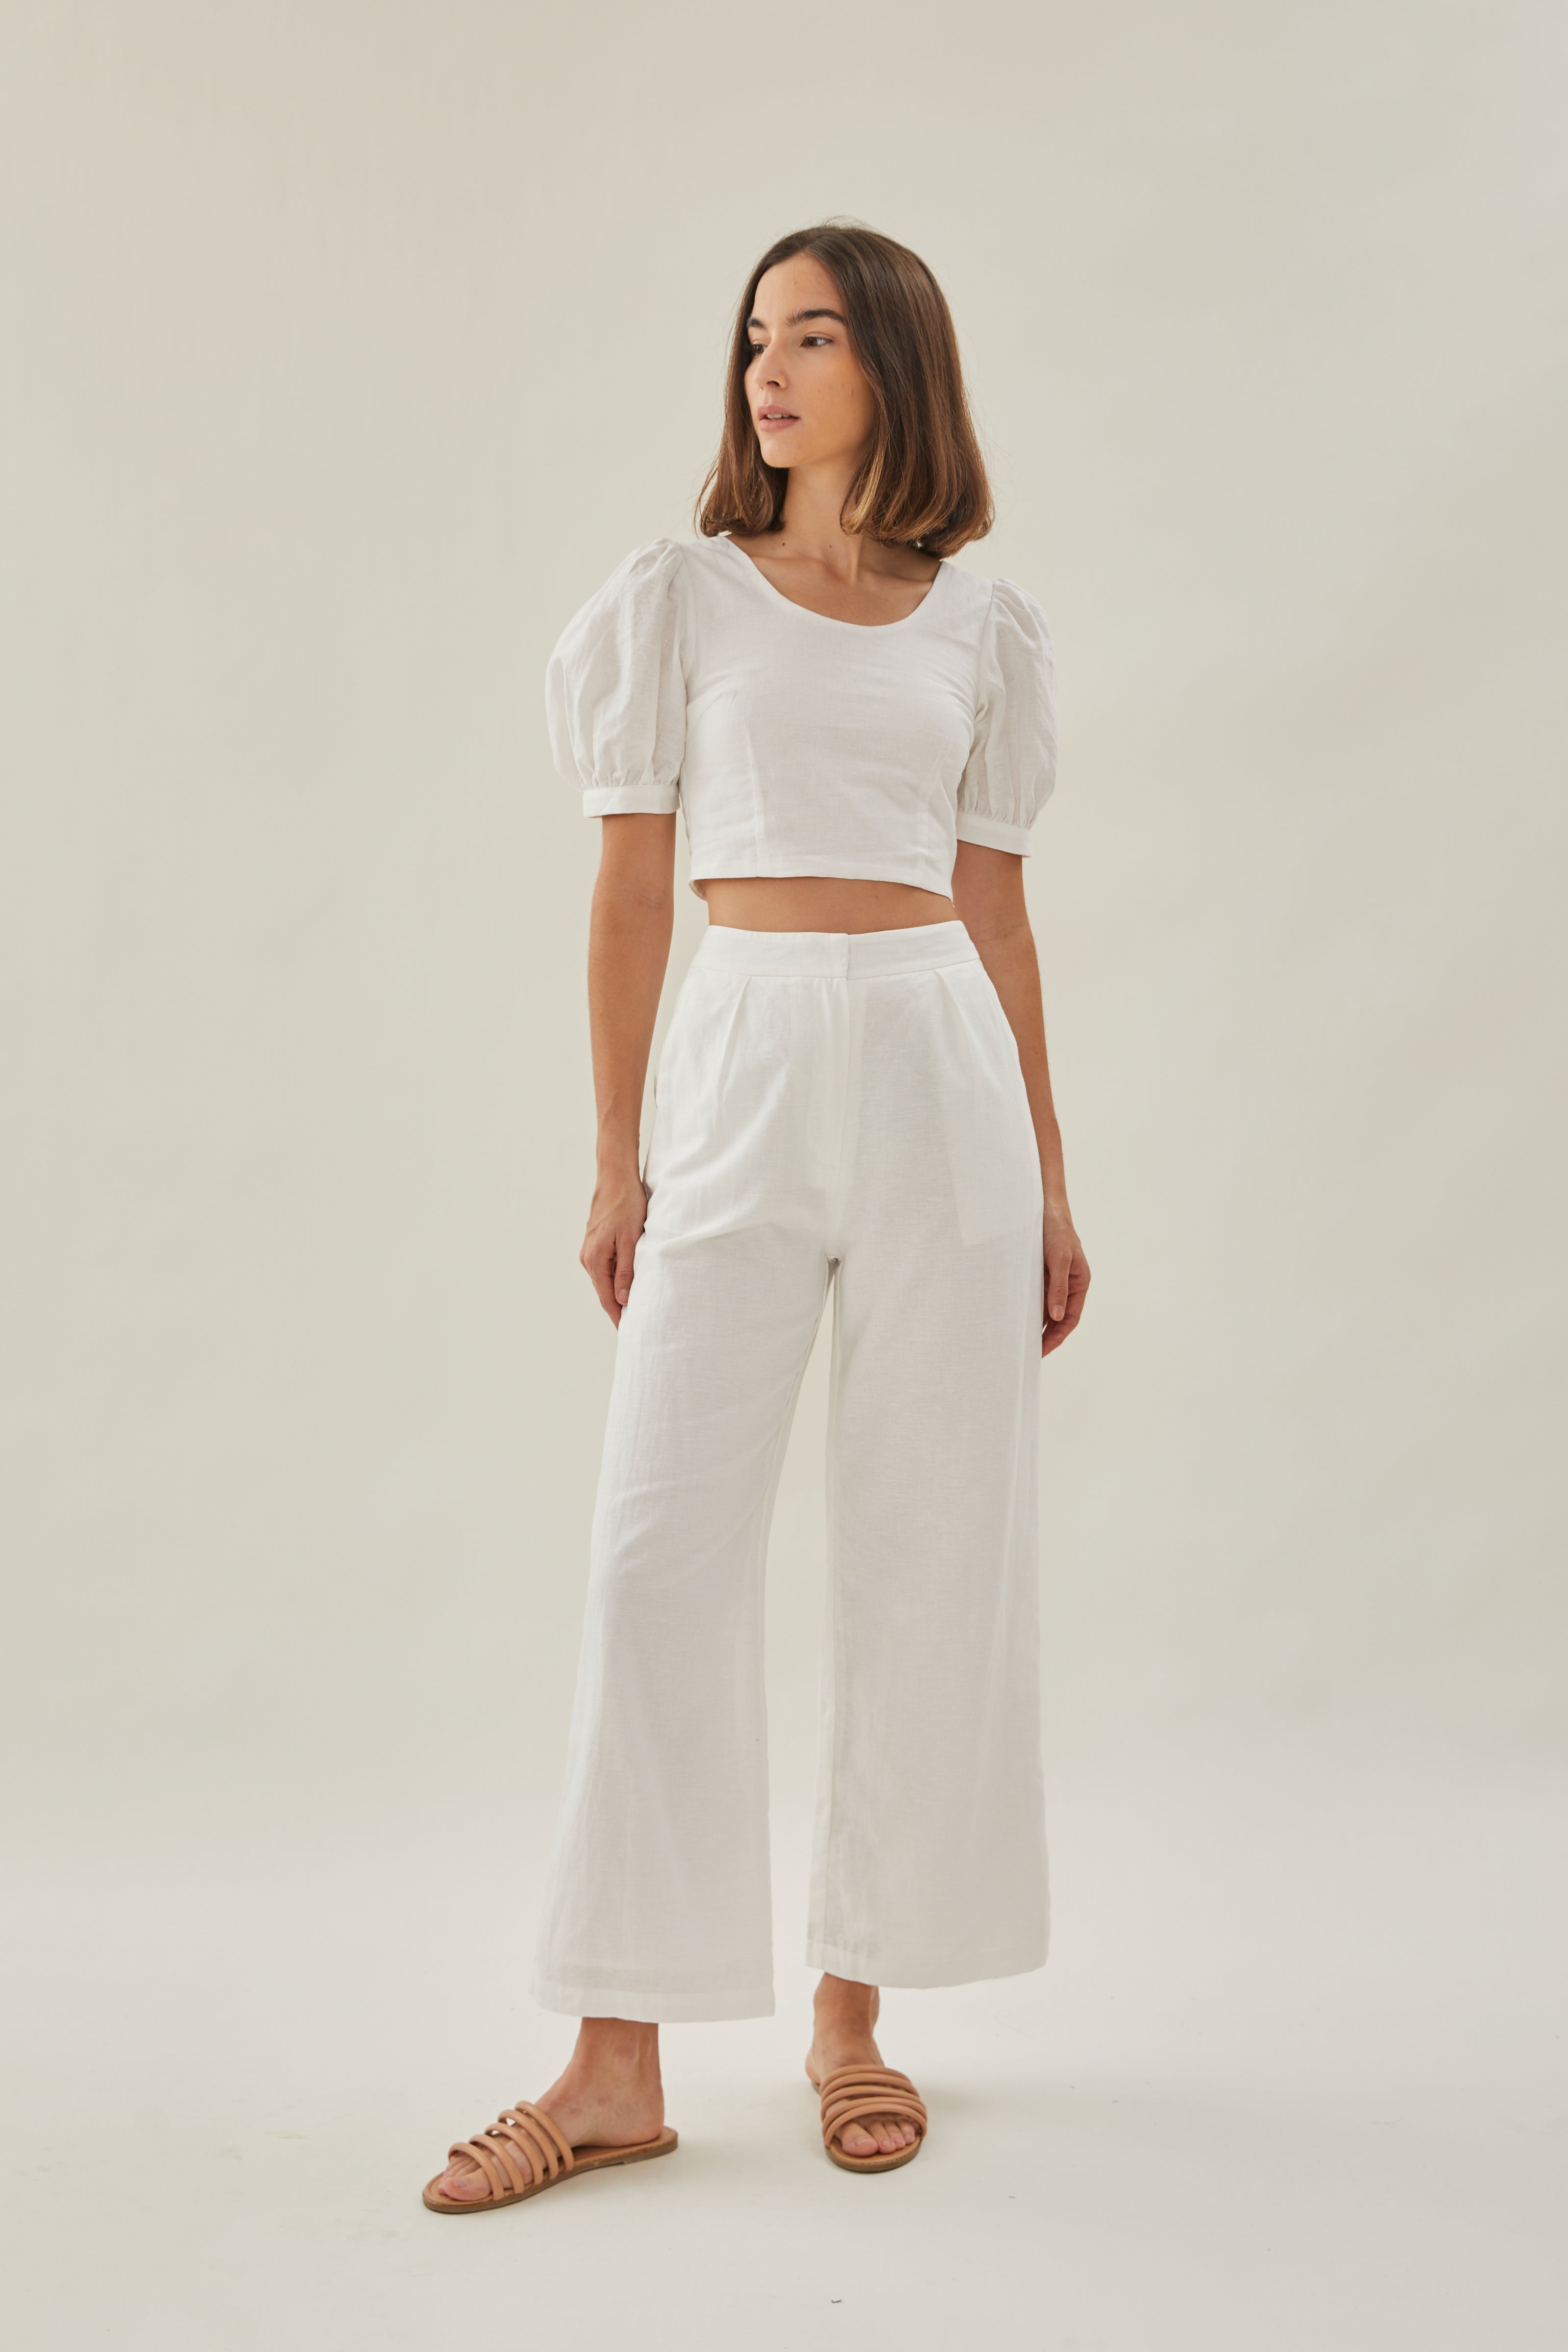 Cropped Puffed Sleeved Top in White